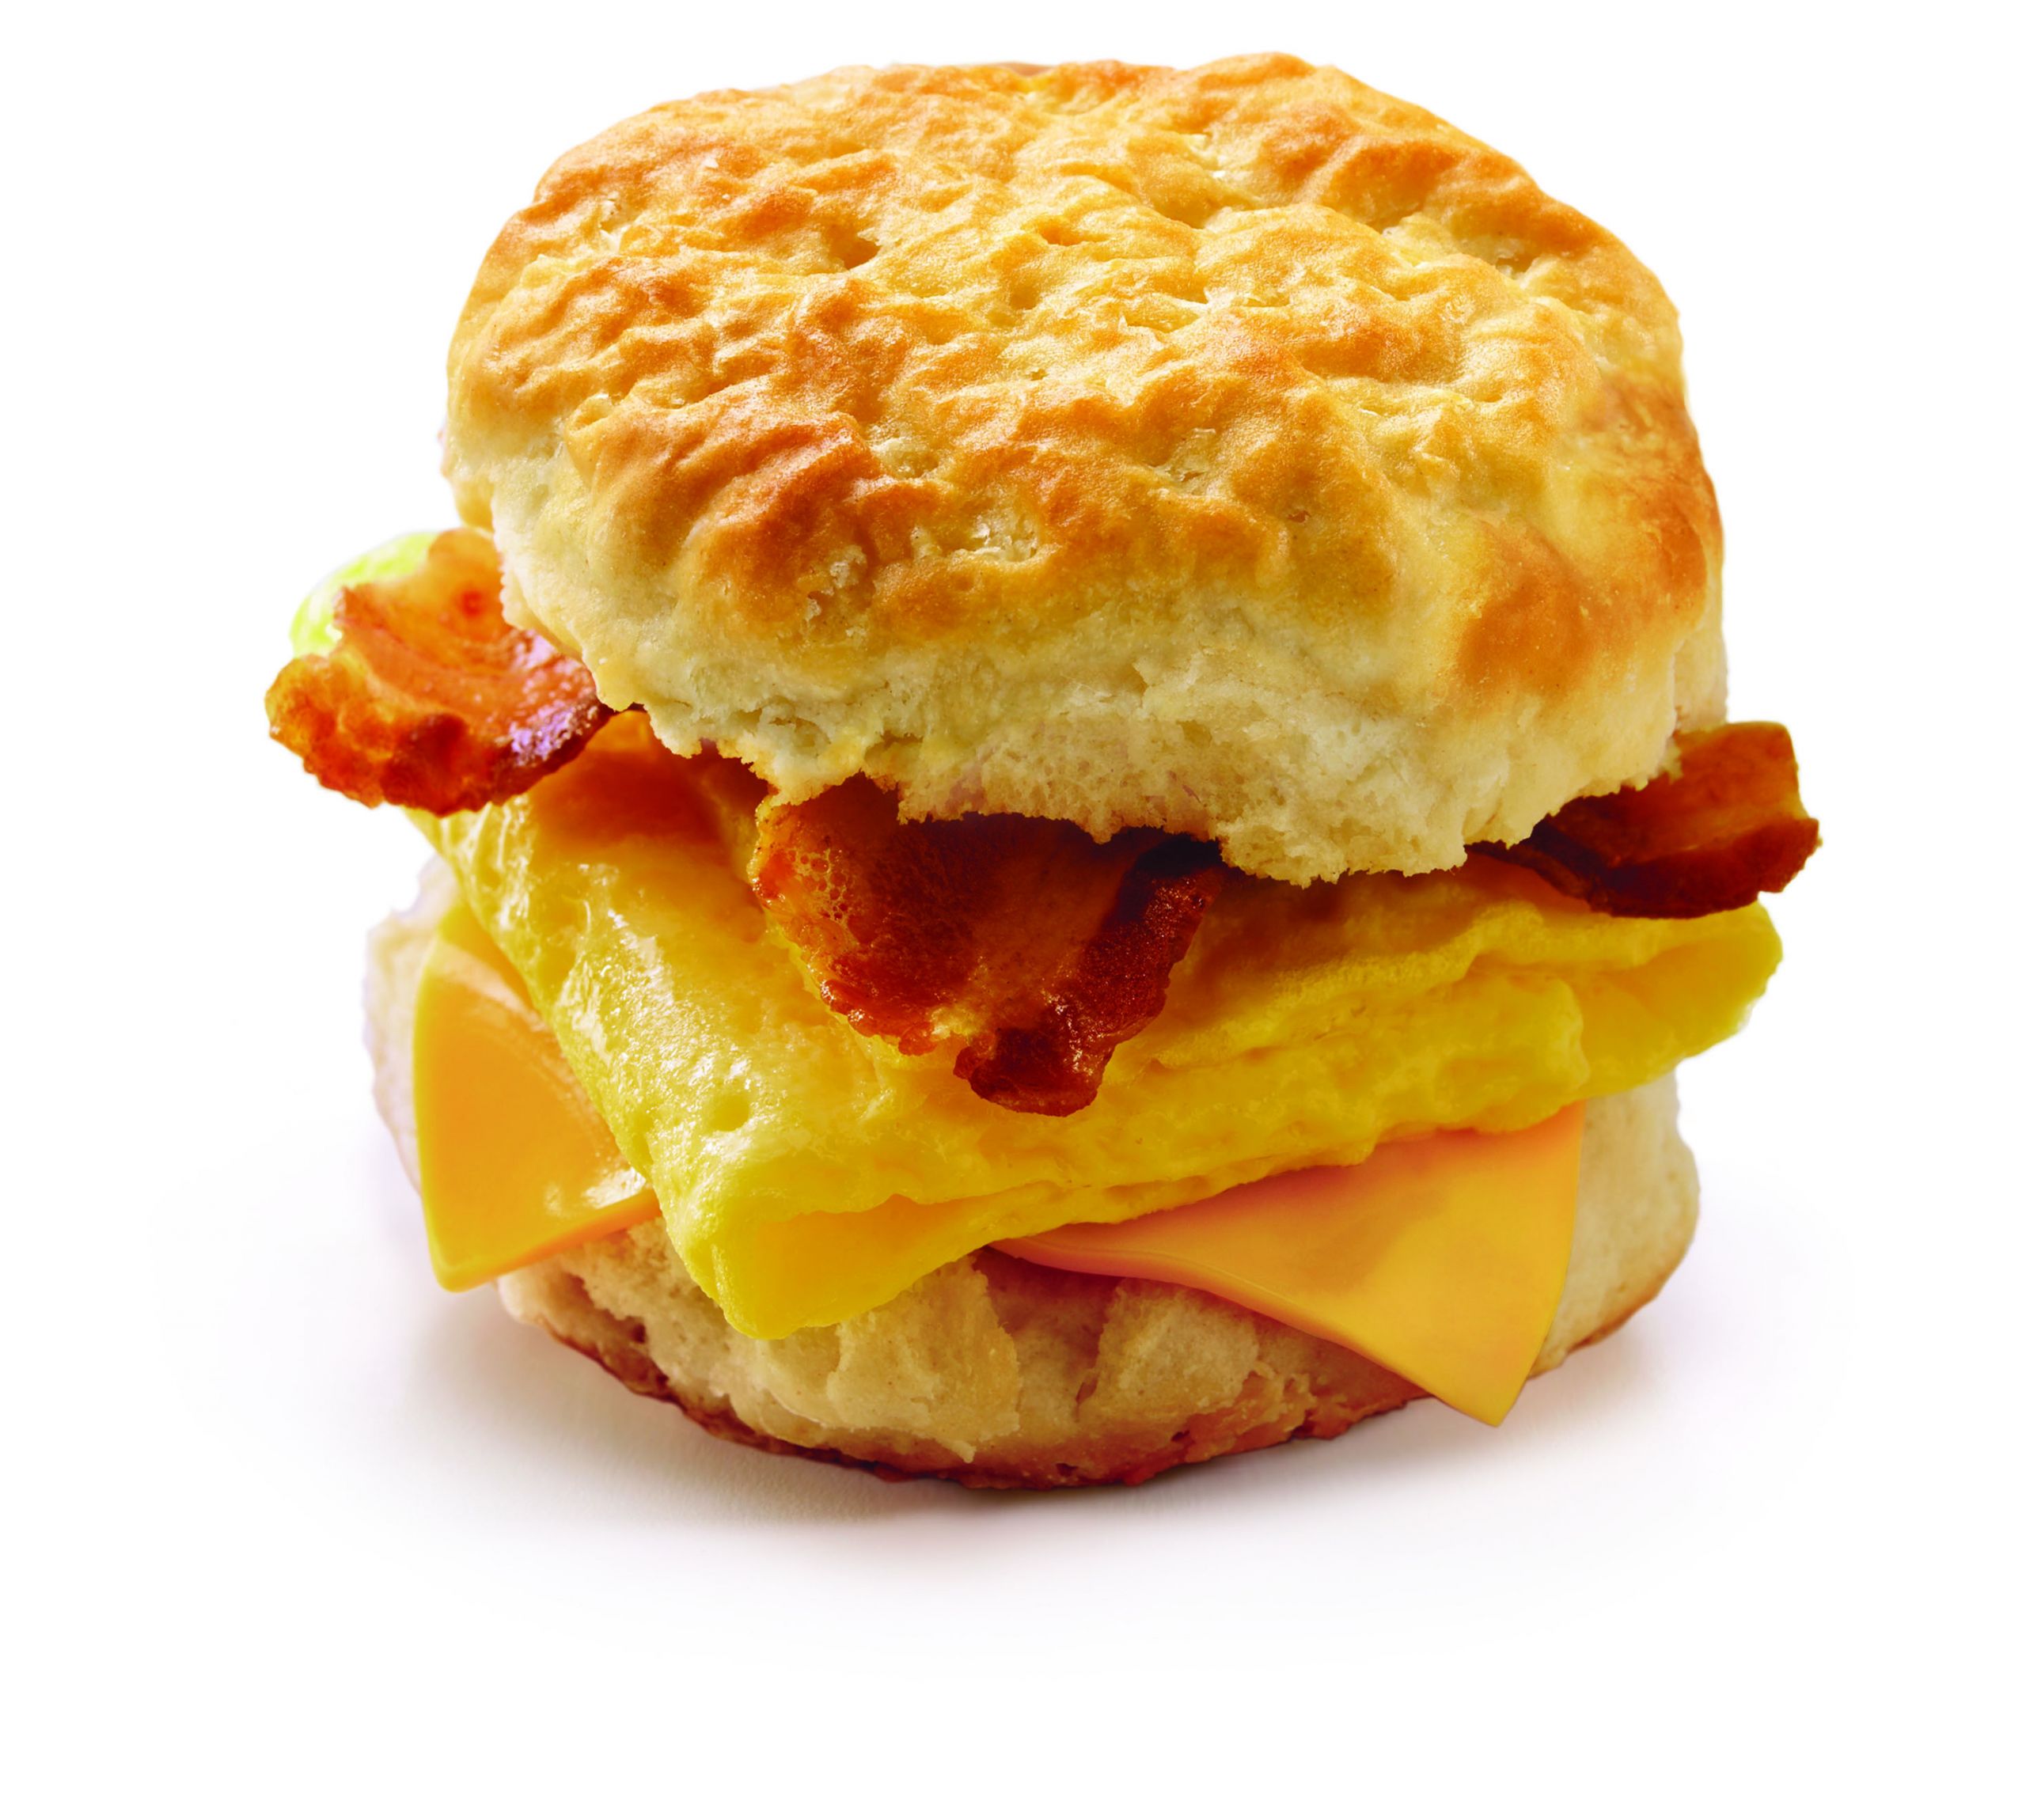 Mcdonald&amp;#039;s Bacon, Egg &amp;amp; Cheese Biscuit Awesome View Carbs In A Bacon Egg and Cheese Biscuit From Mcdonald